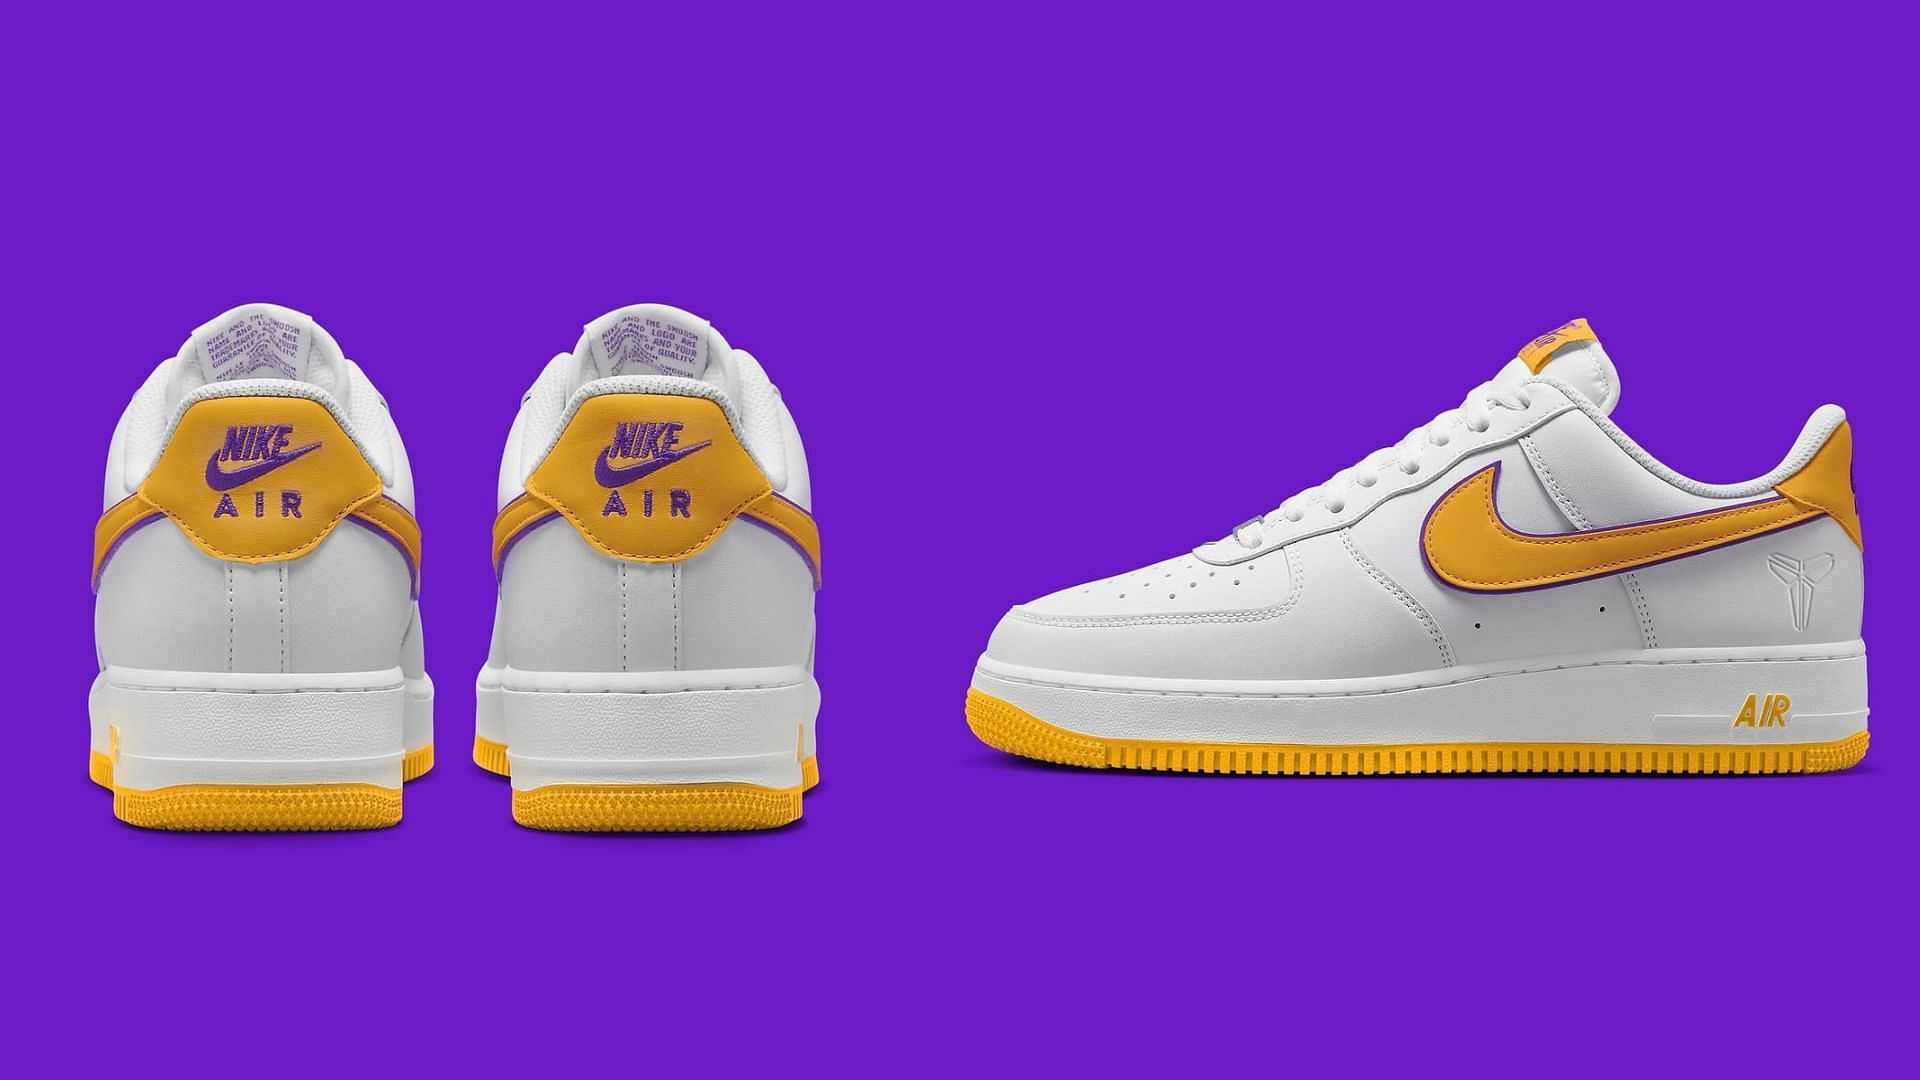 A closer look at the Nike Air Force 1 Low Kobe Bryant sneakers (Image via YouTube/@ragnoupdates)